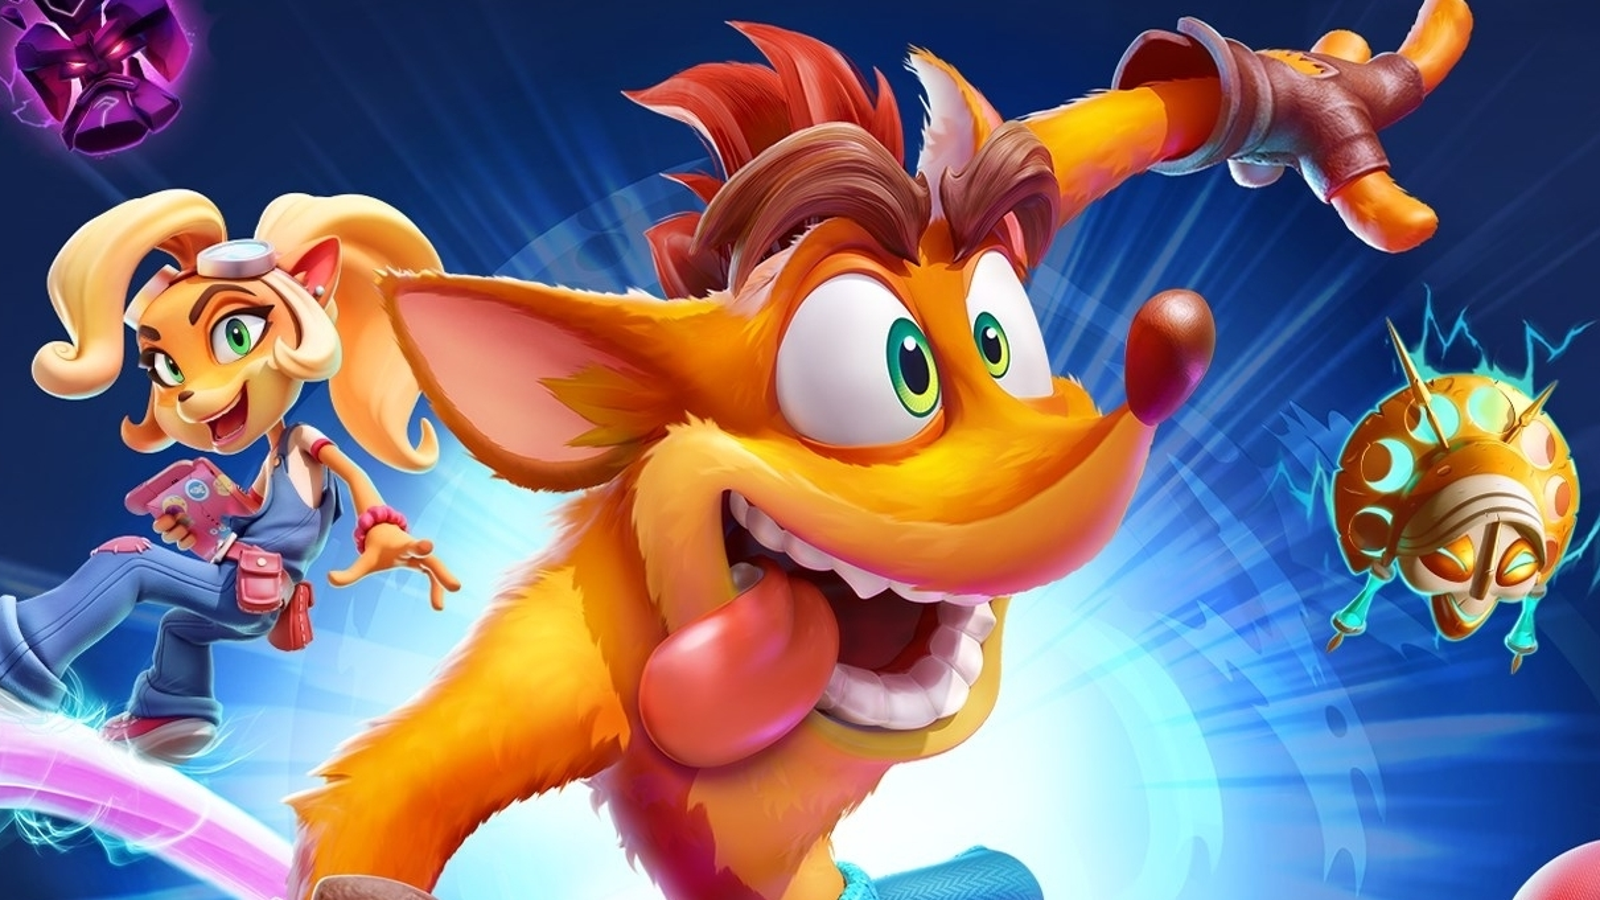 Crash 4: It's About Time has sold over 5 million copies